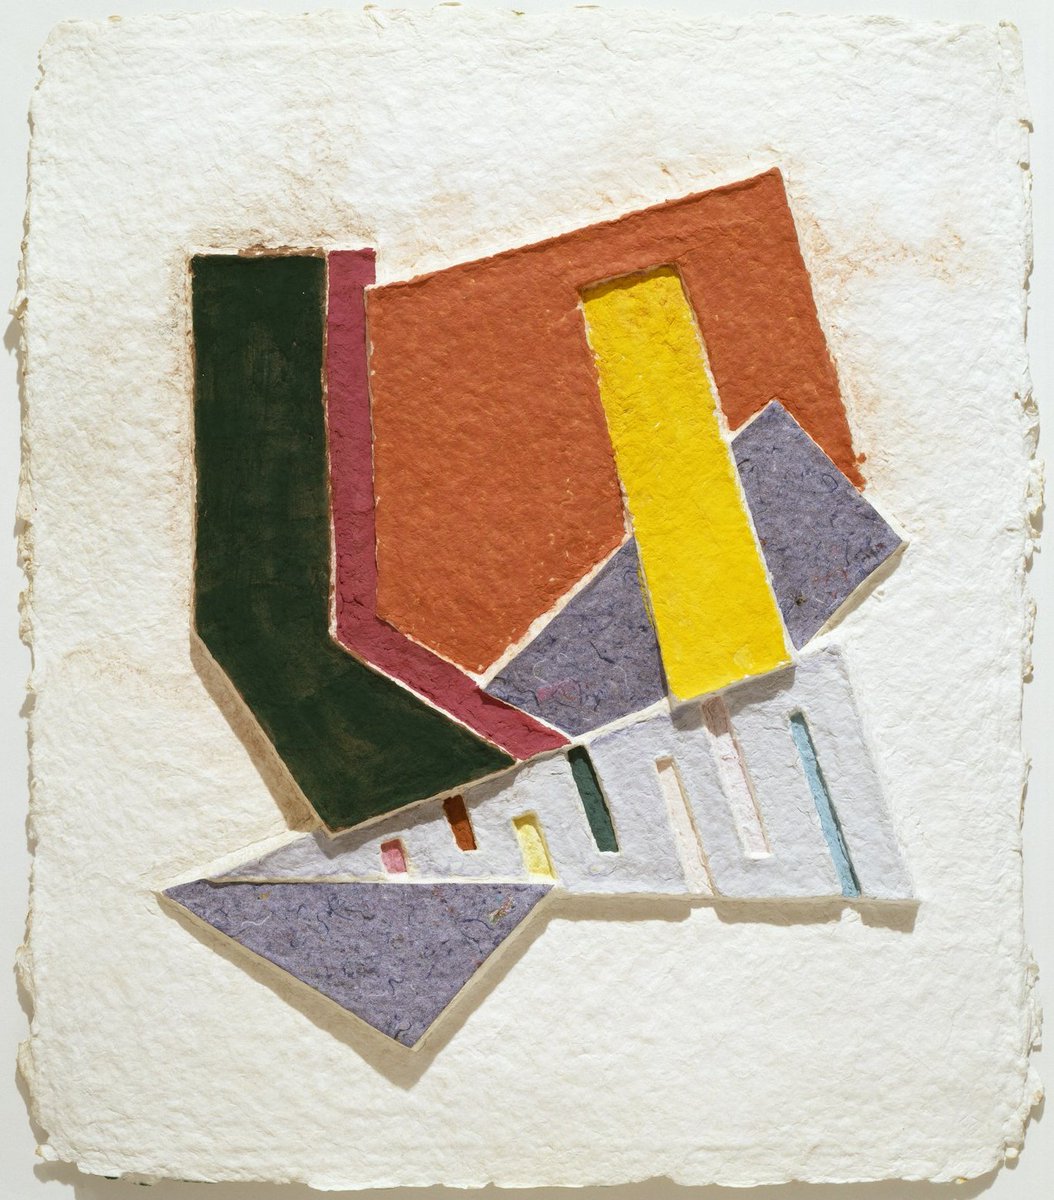 Frank Stella, Kozangrodek II (from the Paper Relief Project), 1975